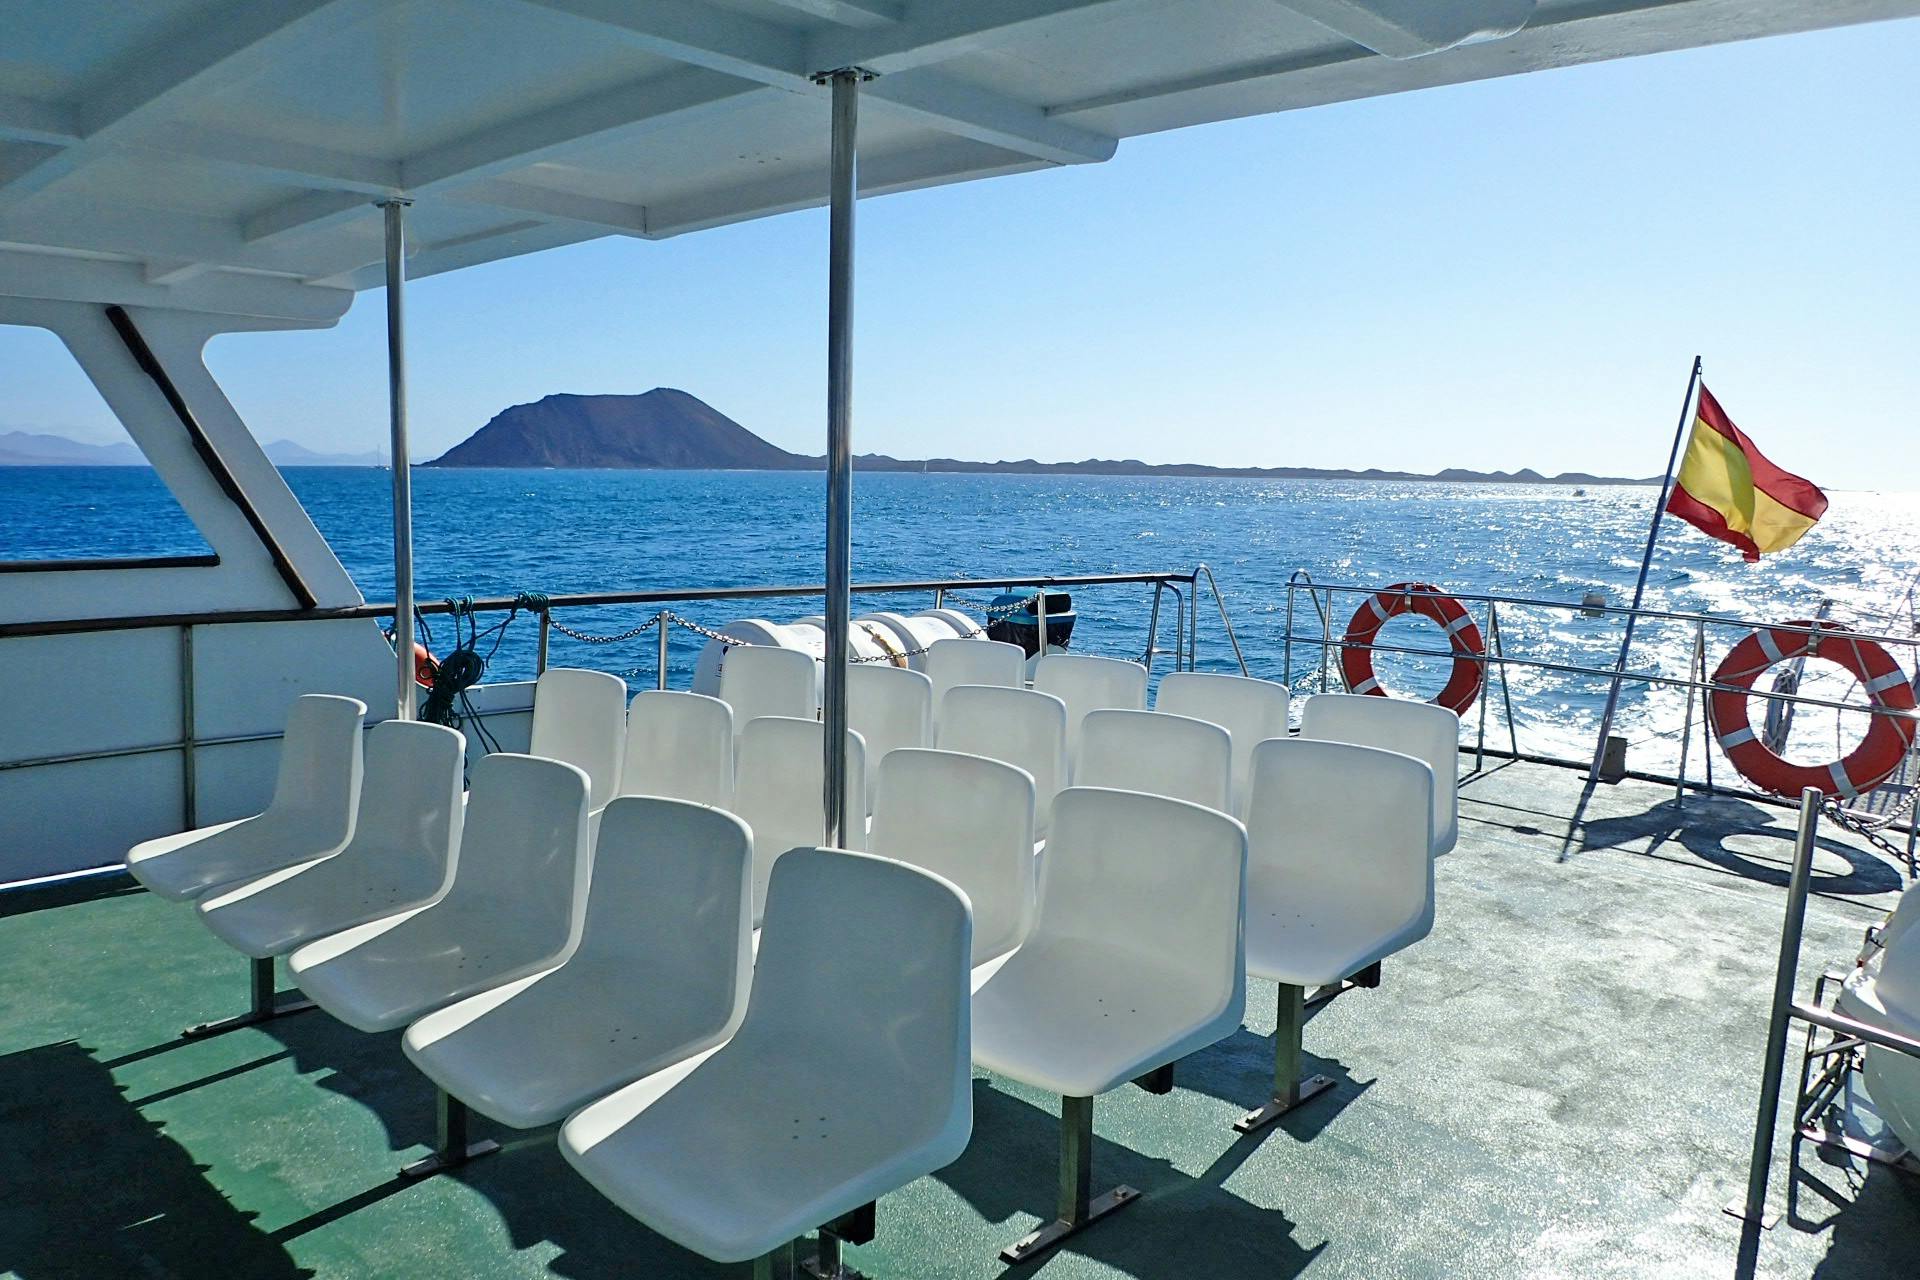 Round trip ferry to Lobos Island with authorization from Corralejo Musement